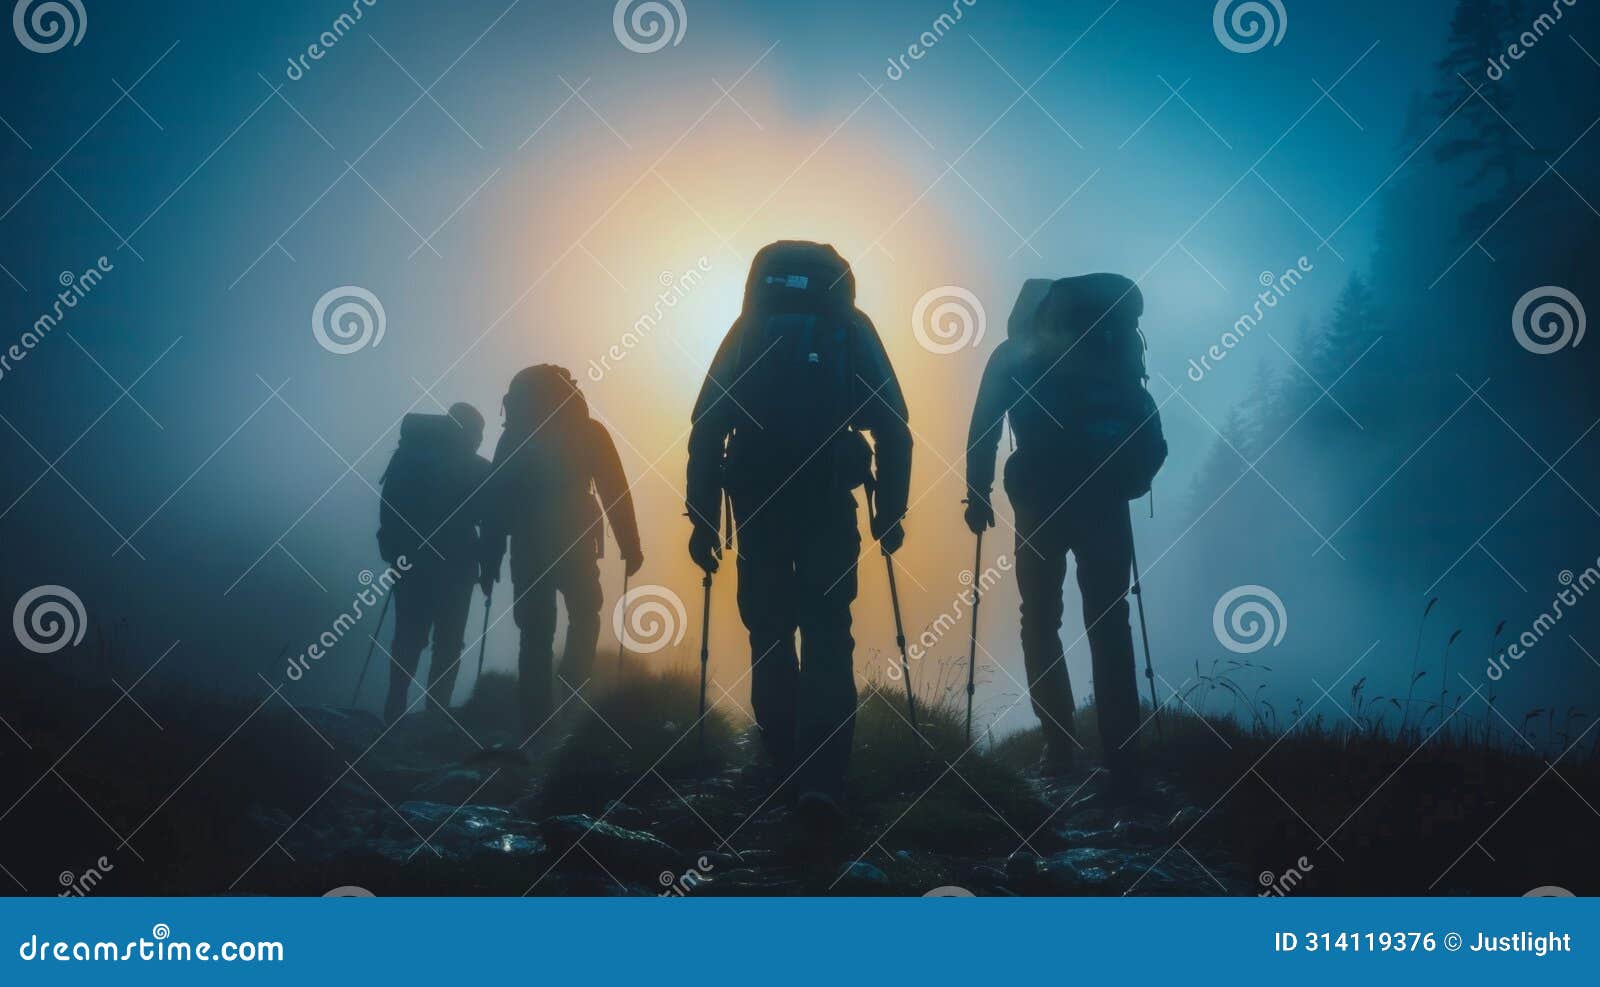 a team of adventurers identities concealed by the darkness forging ahead through the mist towards next mysterious